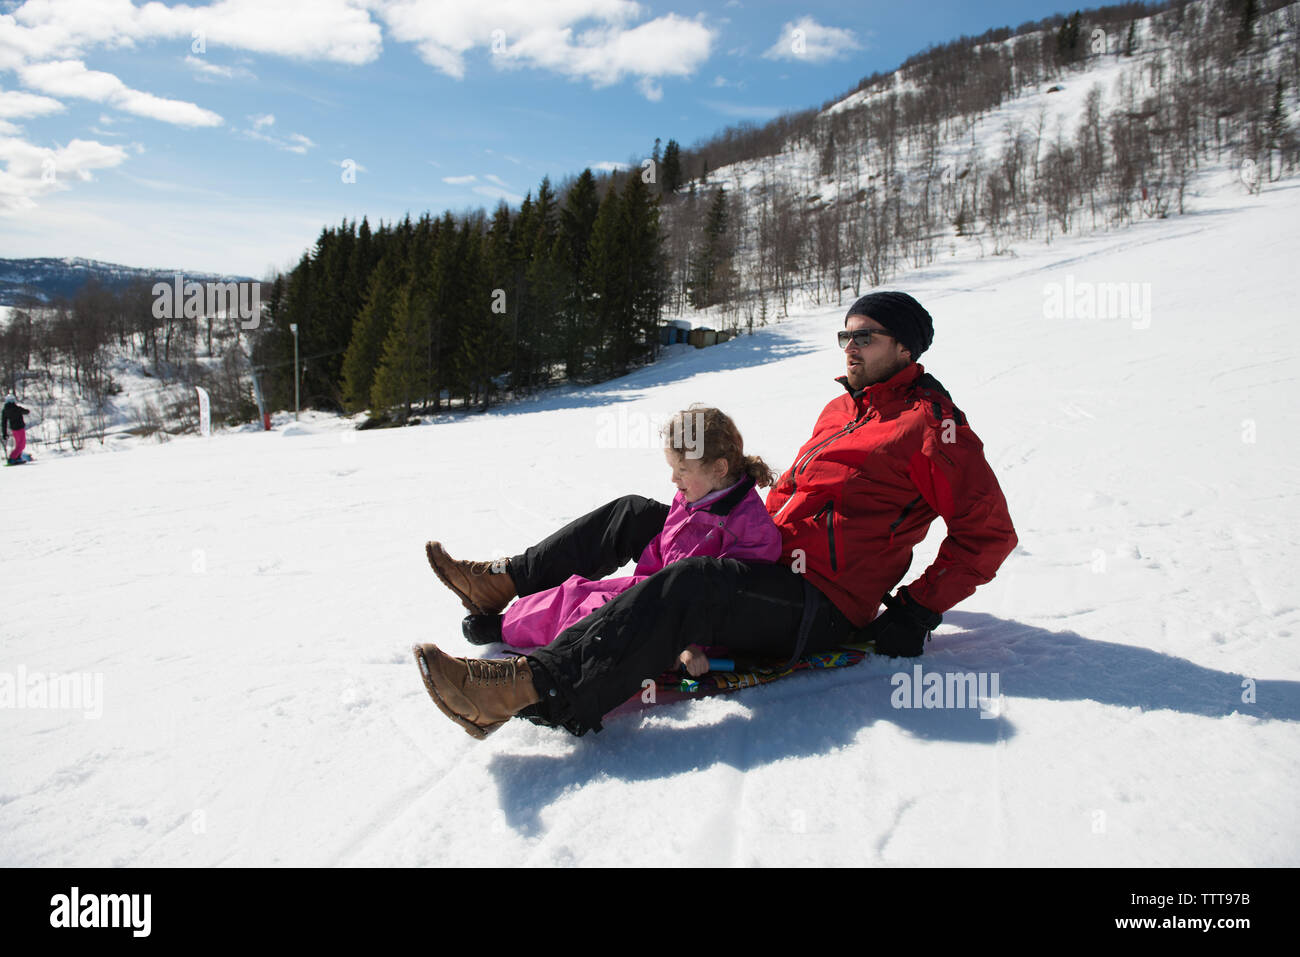 Sledging down a snowy mountain in winter wonderland Stock Photo